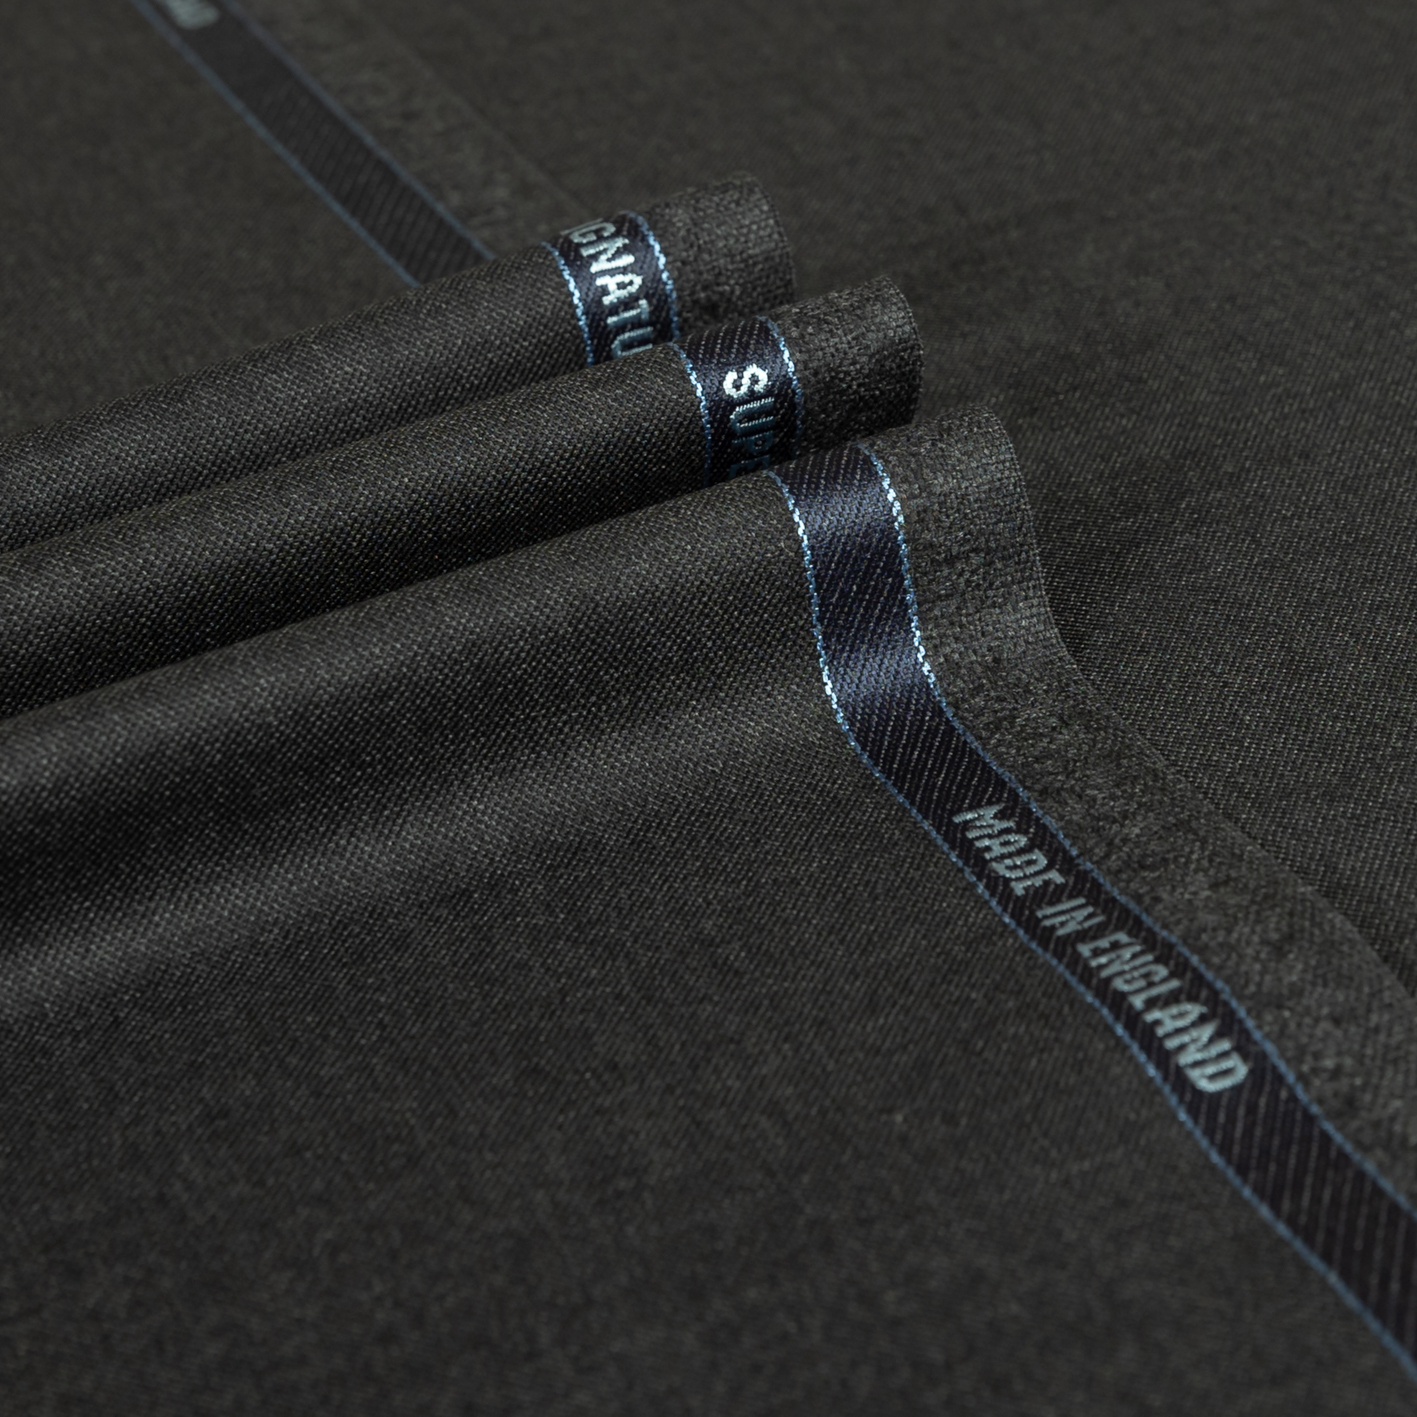 Introducing our Signature Bunch a Super 160s Wool Fabric